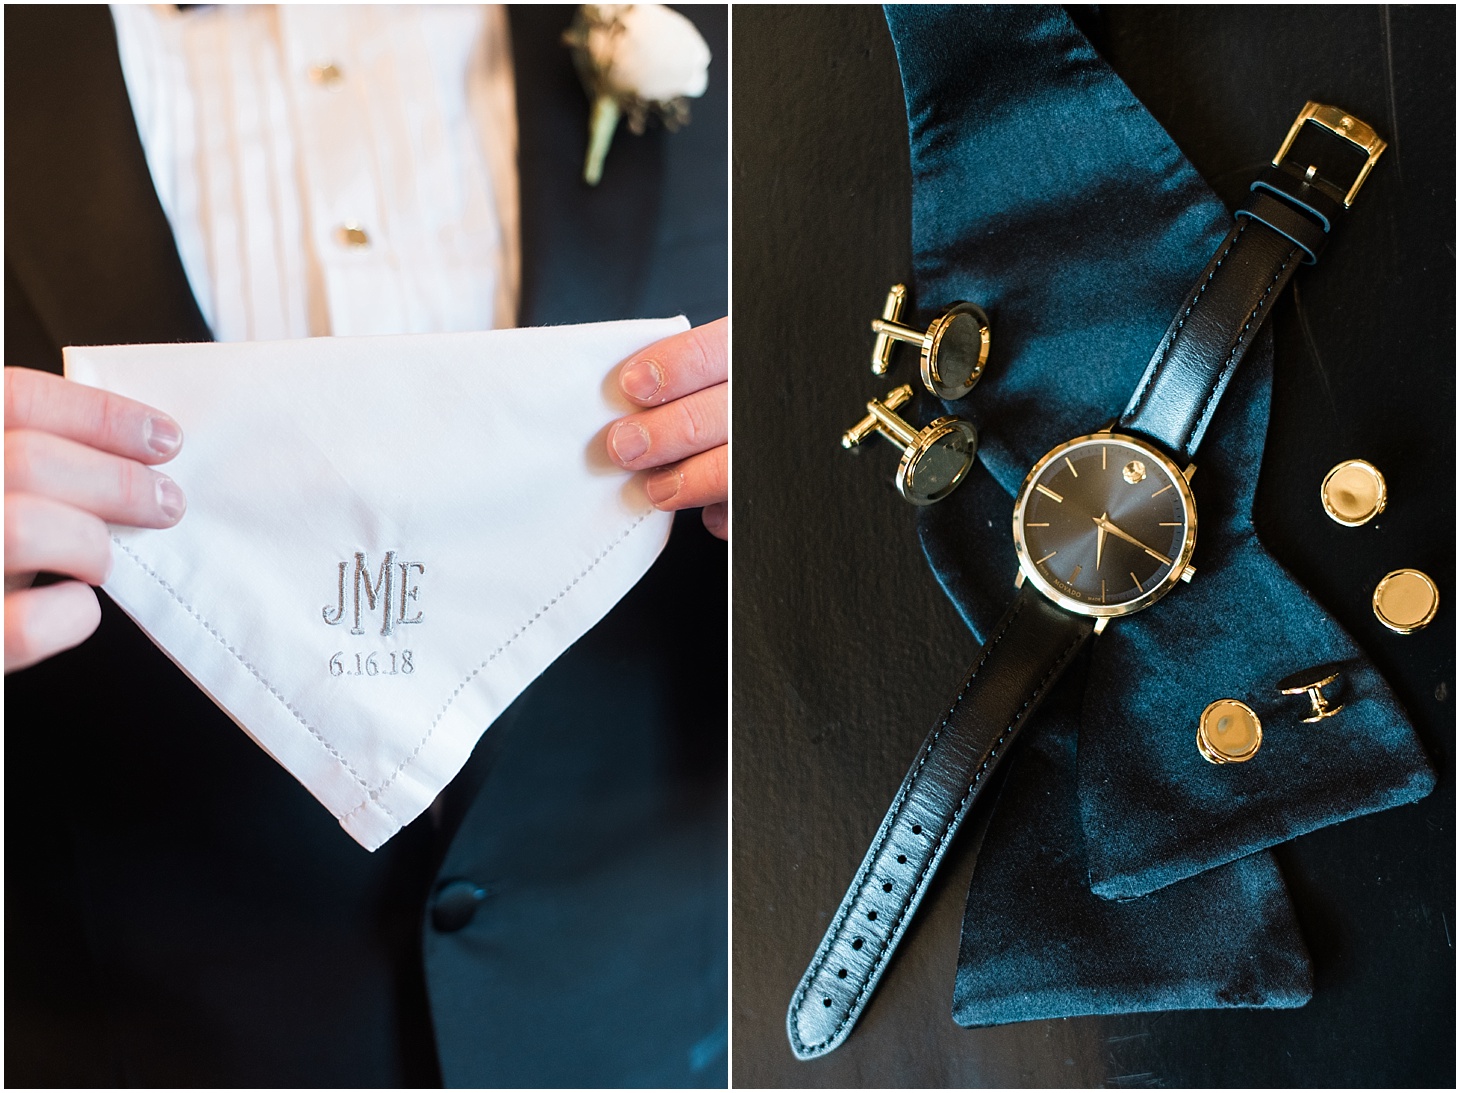 Groom's Details with Movado Watch | Blush and Black Tie Wedding in Williamsburg, VA | Sarah Bradshaw Photography